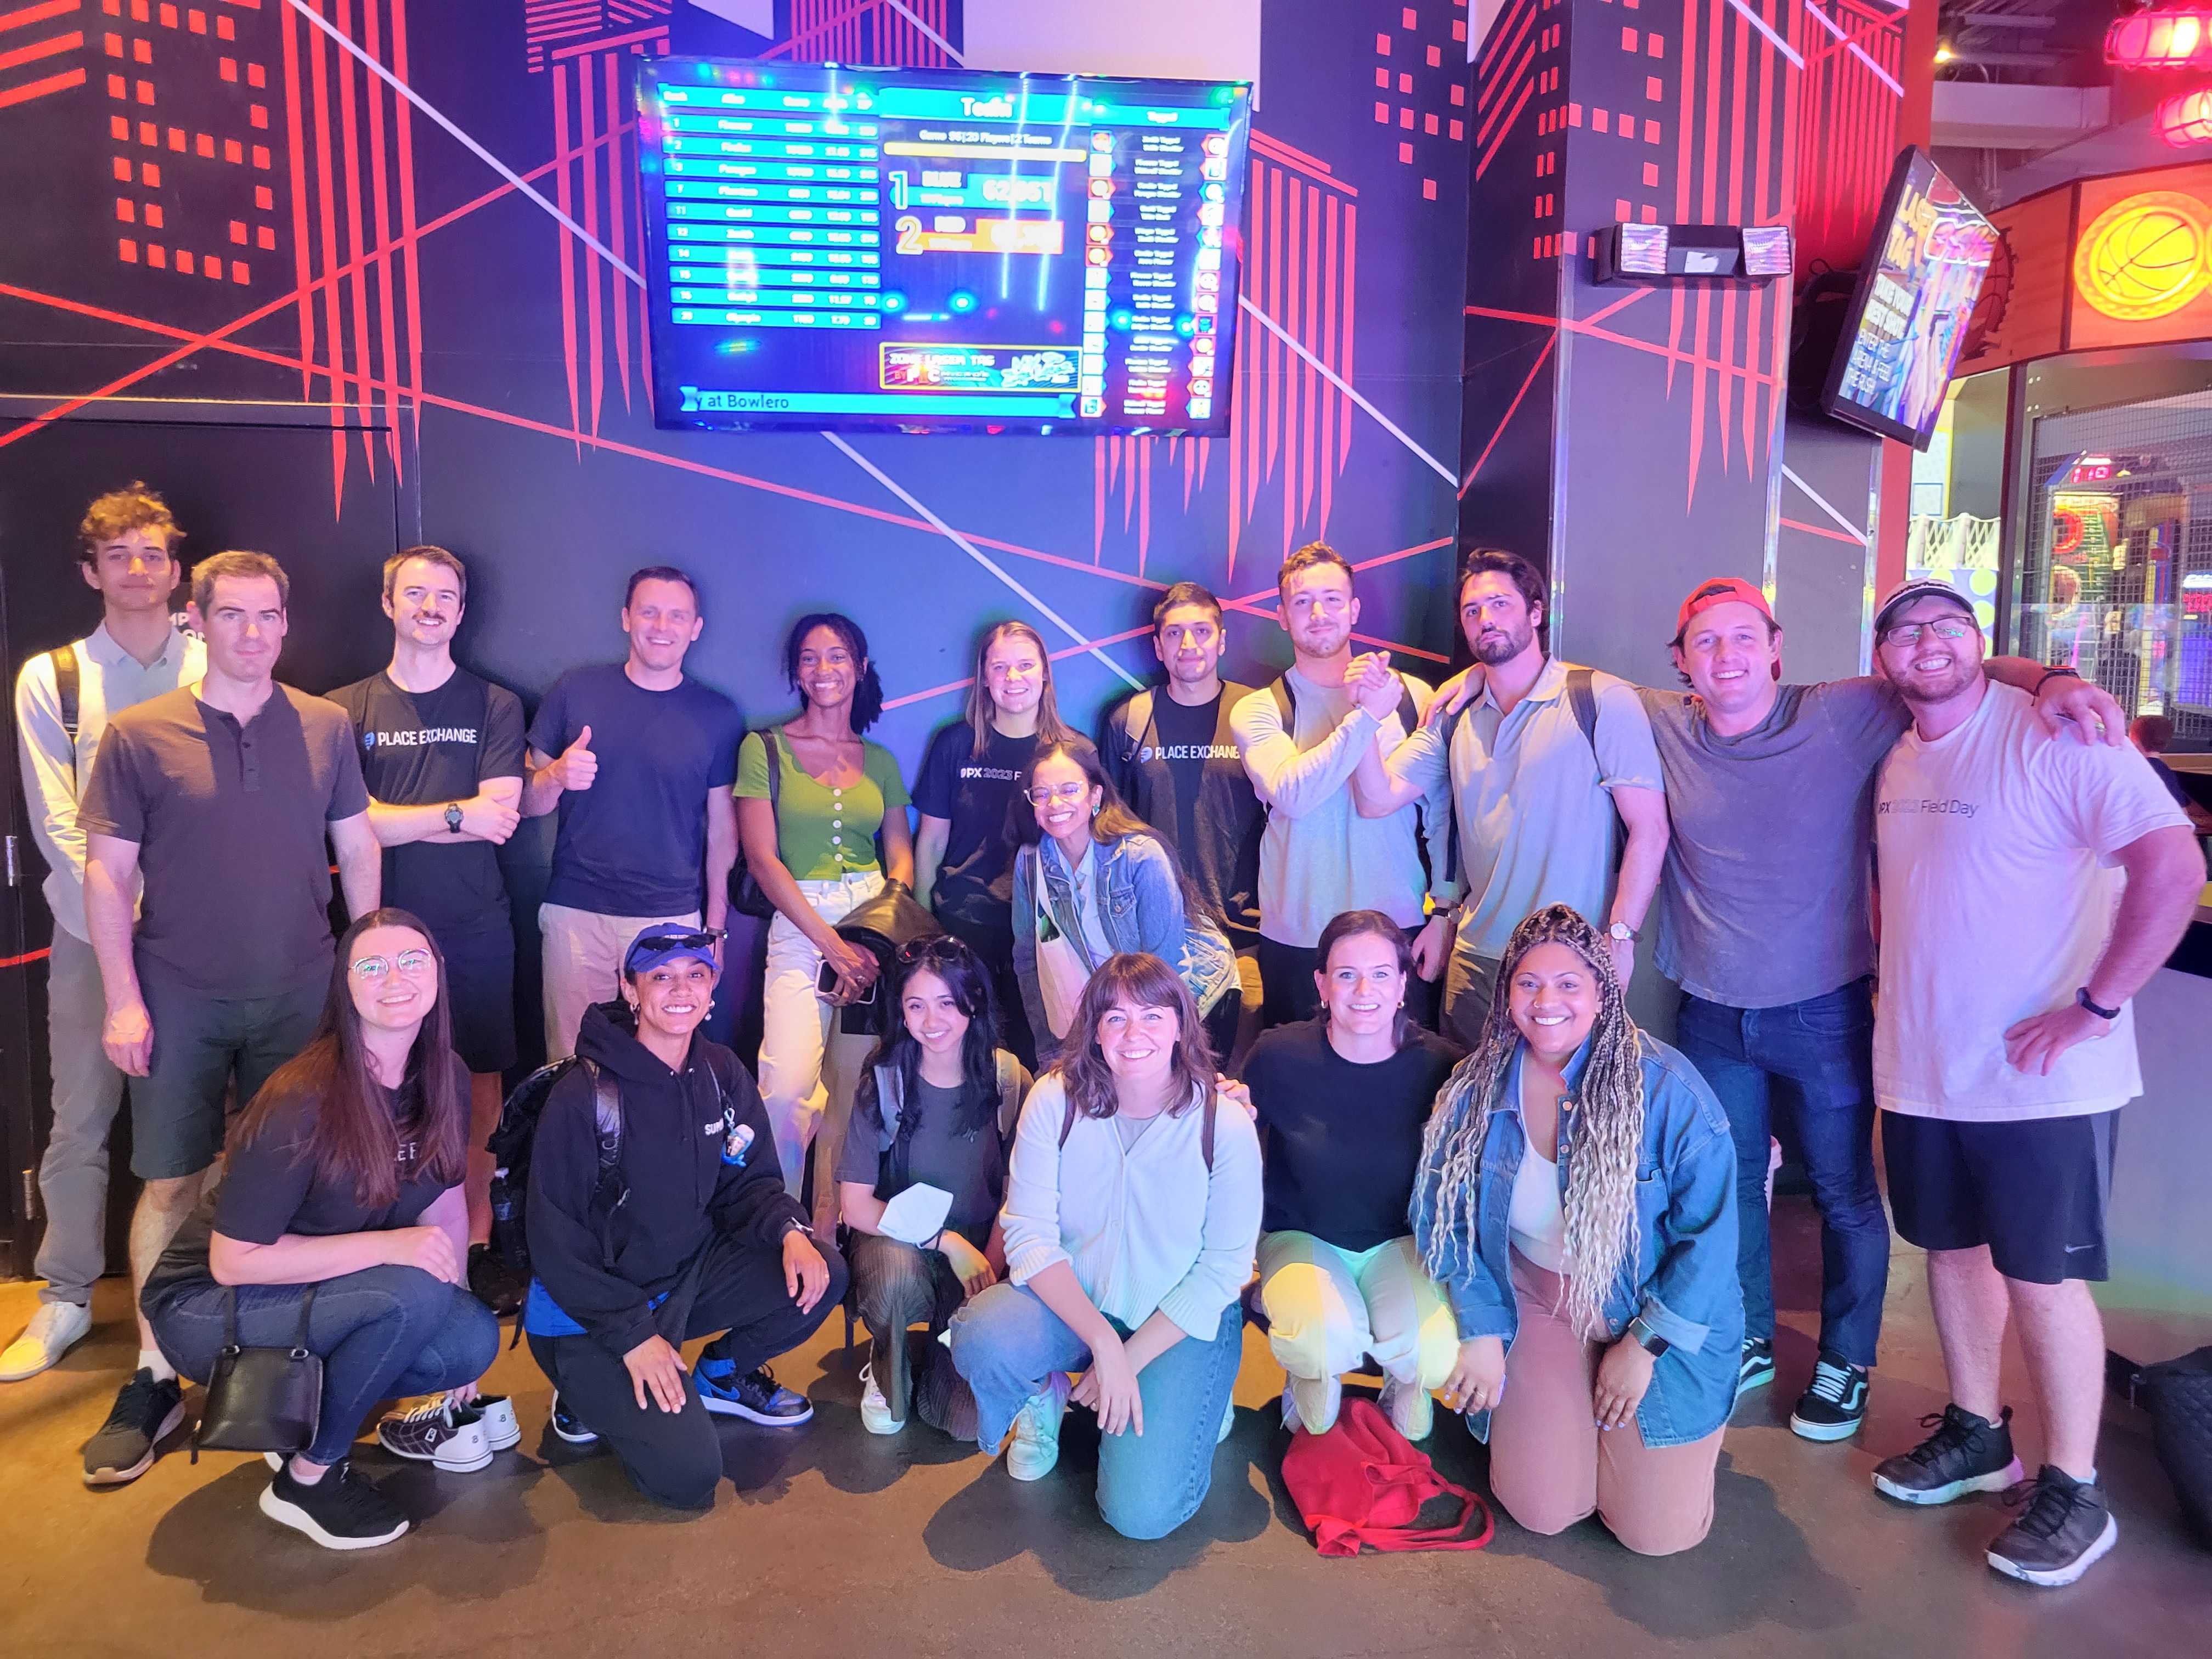  Group photo of Place Exchange team members standing beneath TV screen.